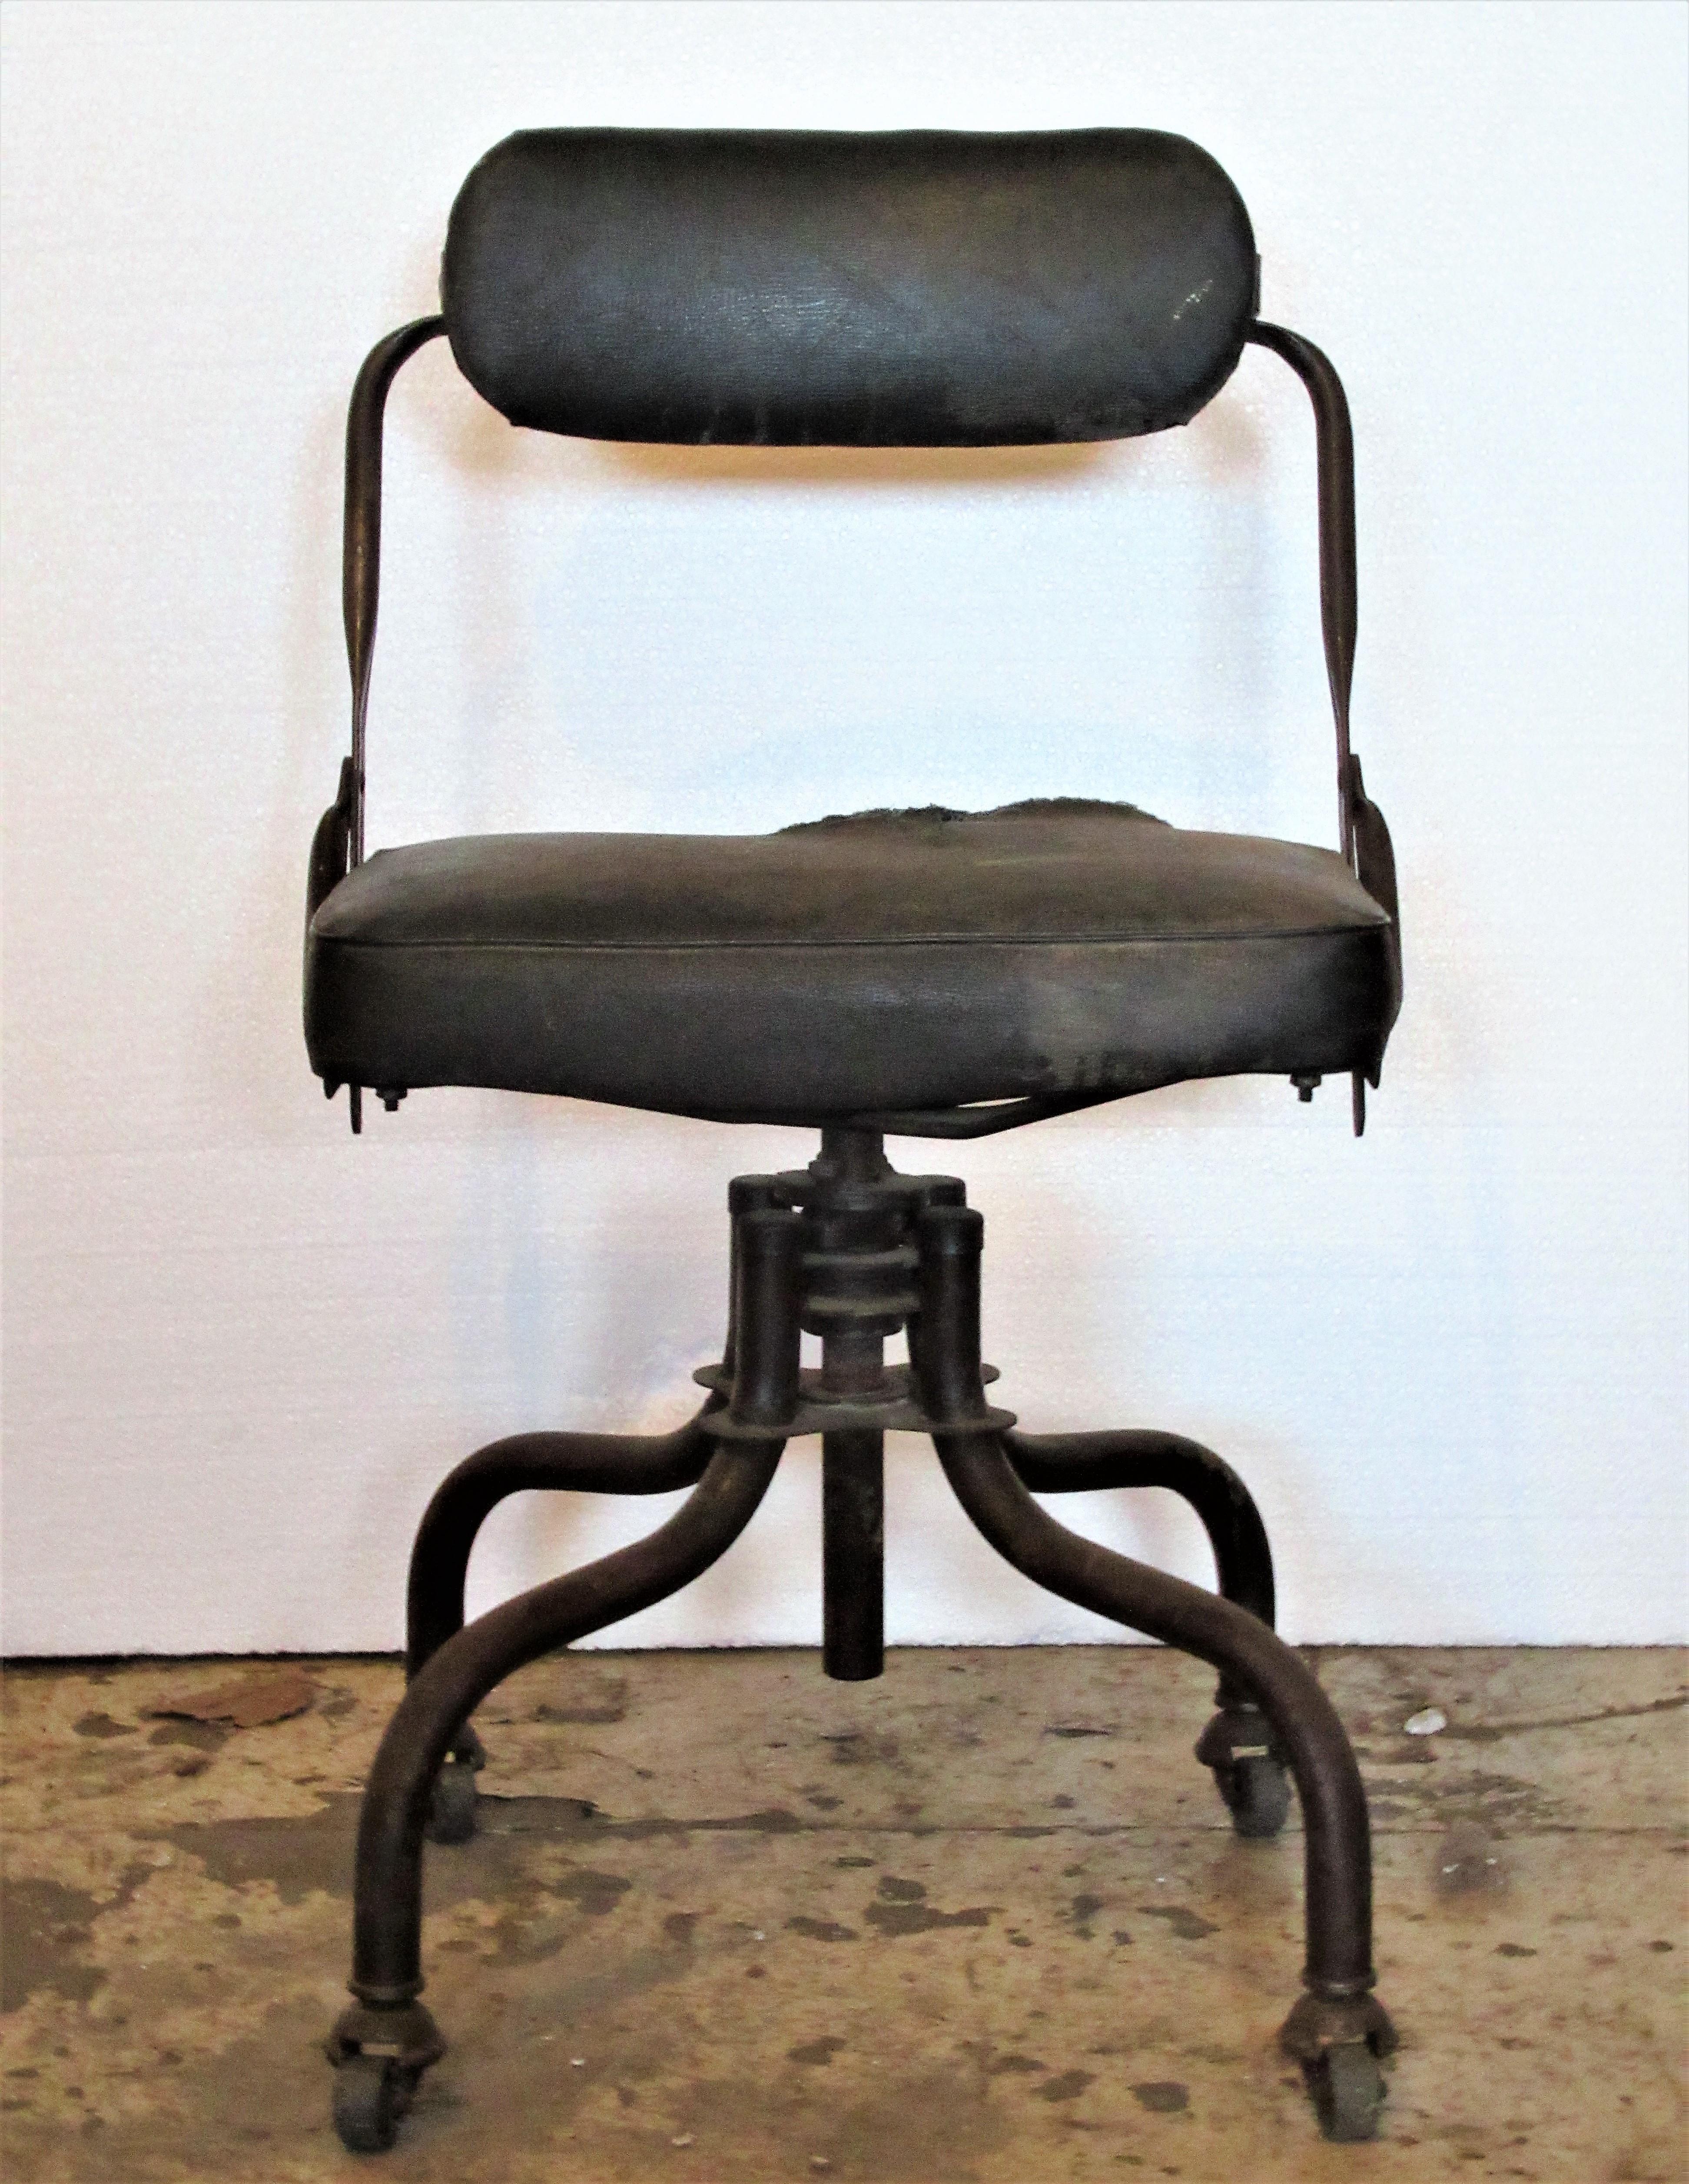 Antique American industrial rolling swivel desk task chairs by Domore Chair Company in original vintage condition. Taller chair measures 31 inches high x 20 inches to seat / lower chair measures 29 inches high x 18 inches to seat (dark green oil